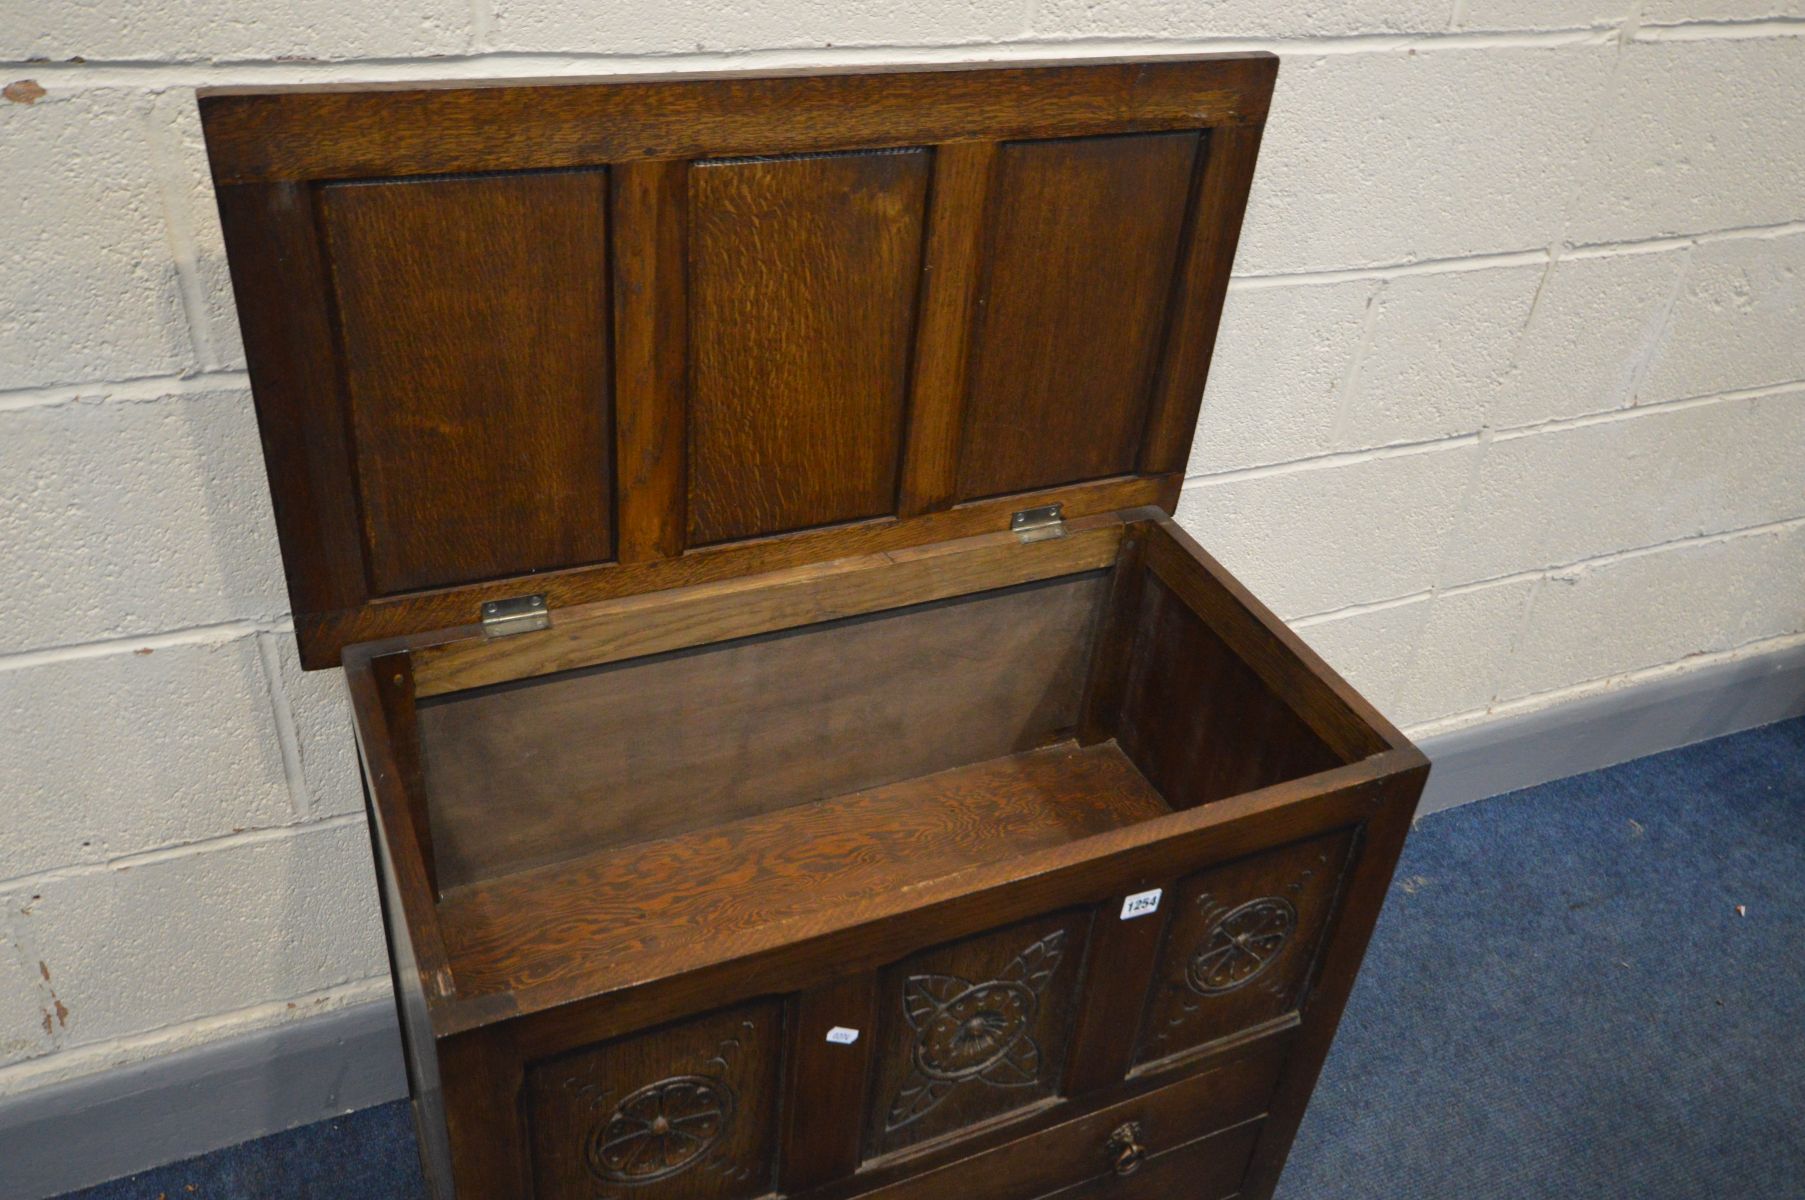 AN OAK PANELLED BLANKET CHEST, with two drawers, width 82cm x depth 45cm x height 69cm - Image 2 of 3